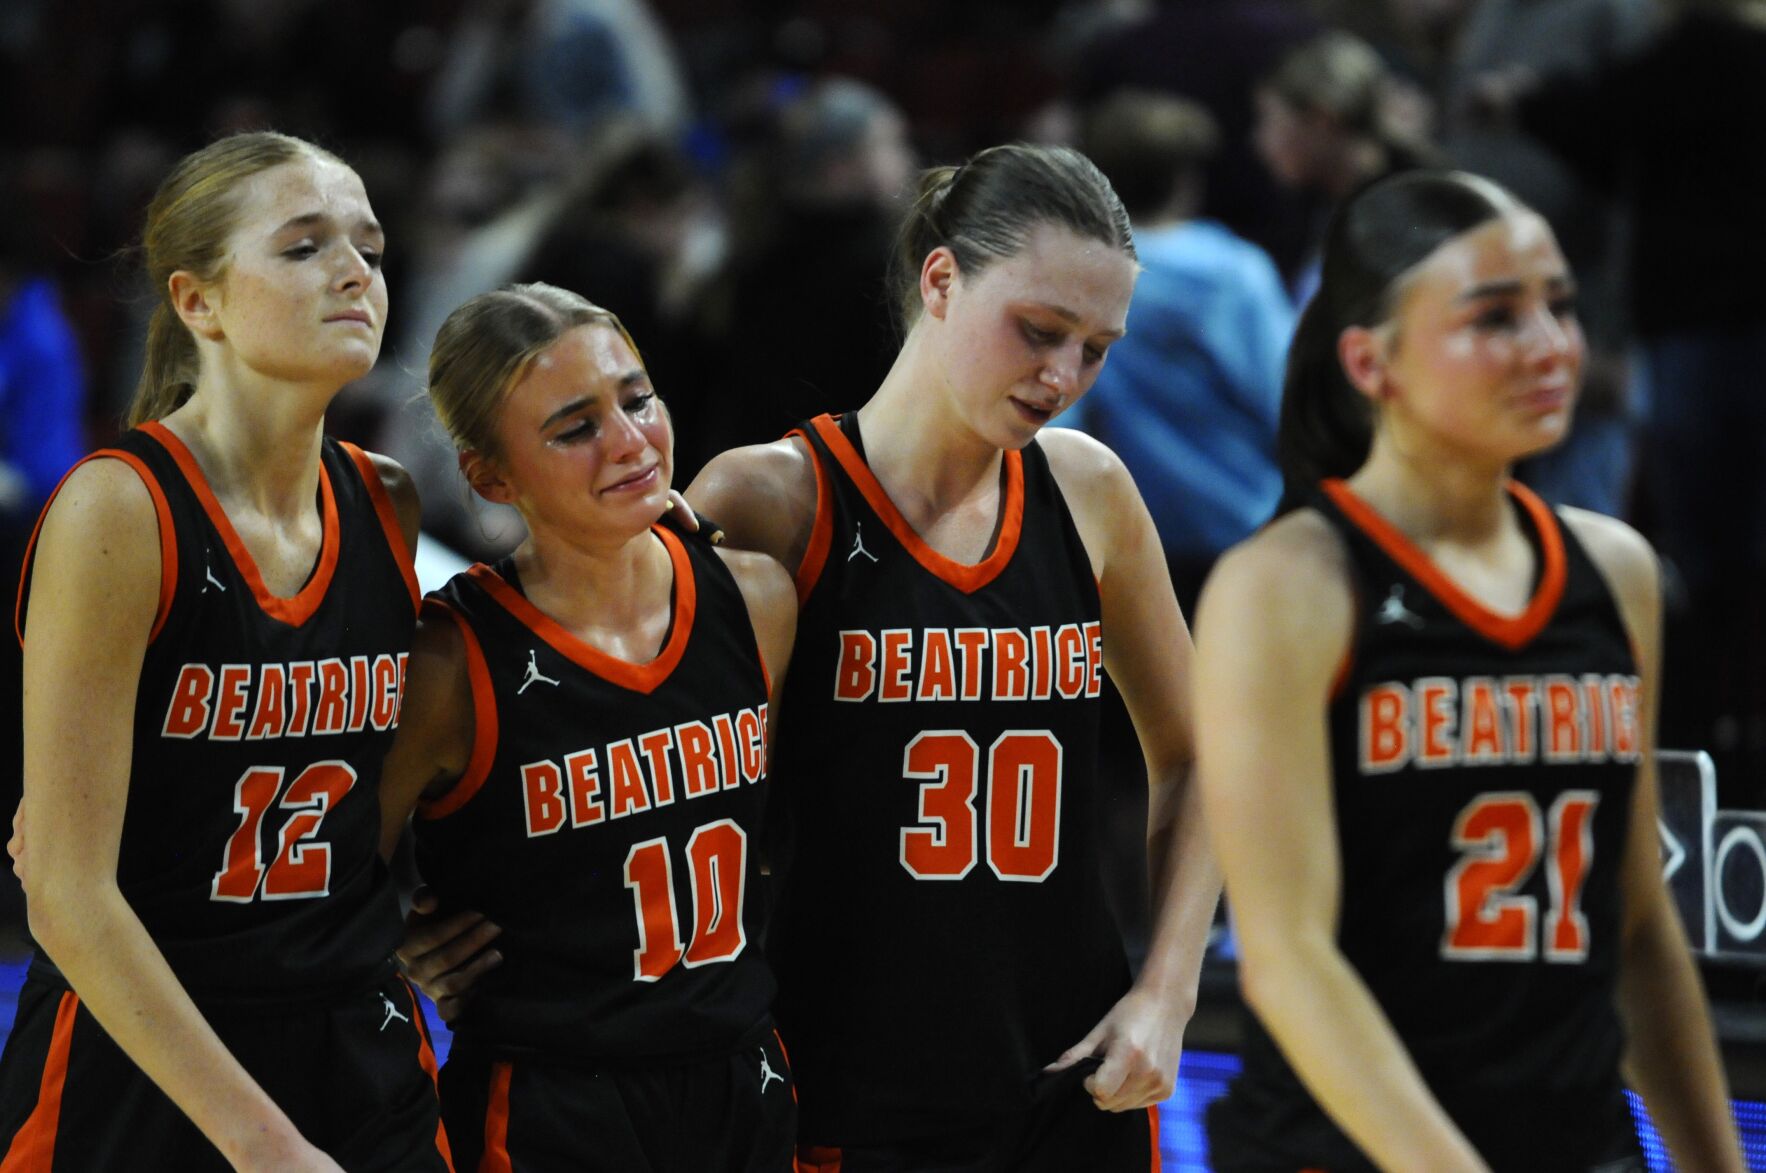 Elkhorn North Defeats Beatrice in Close State Semifinal Battle